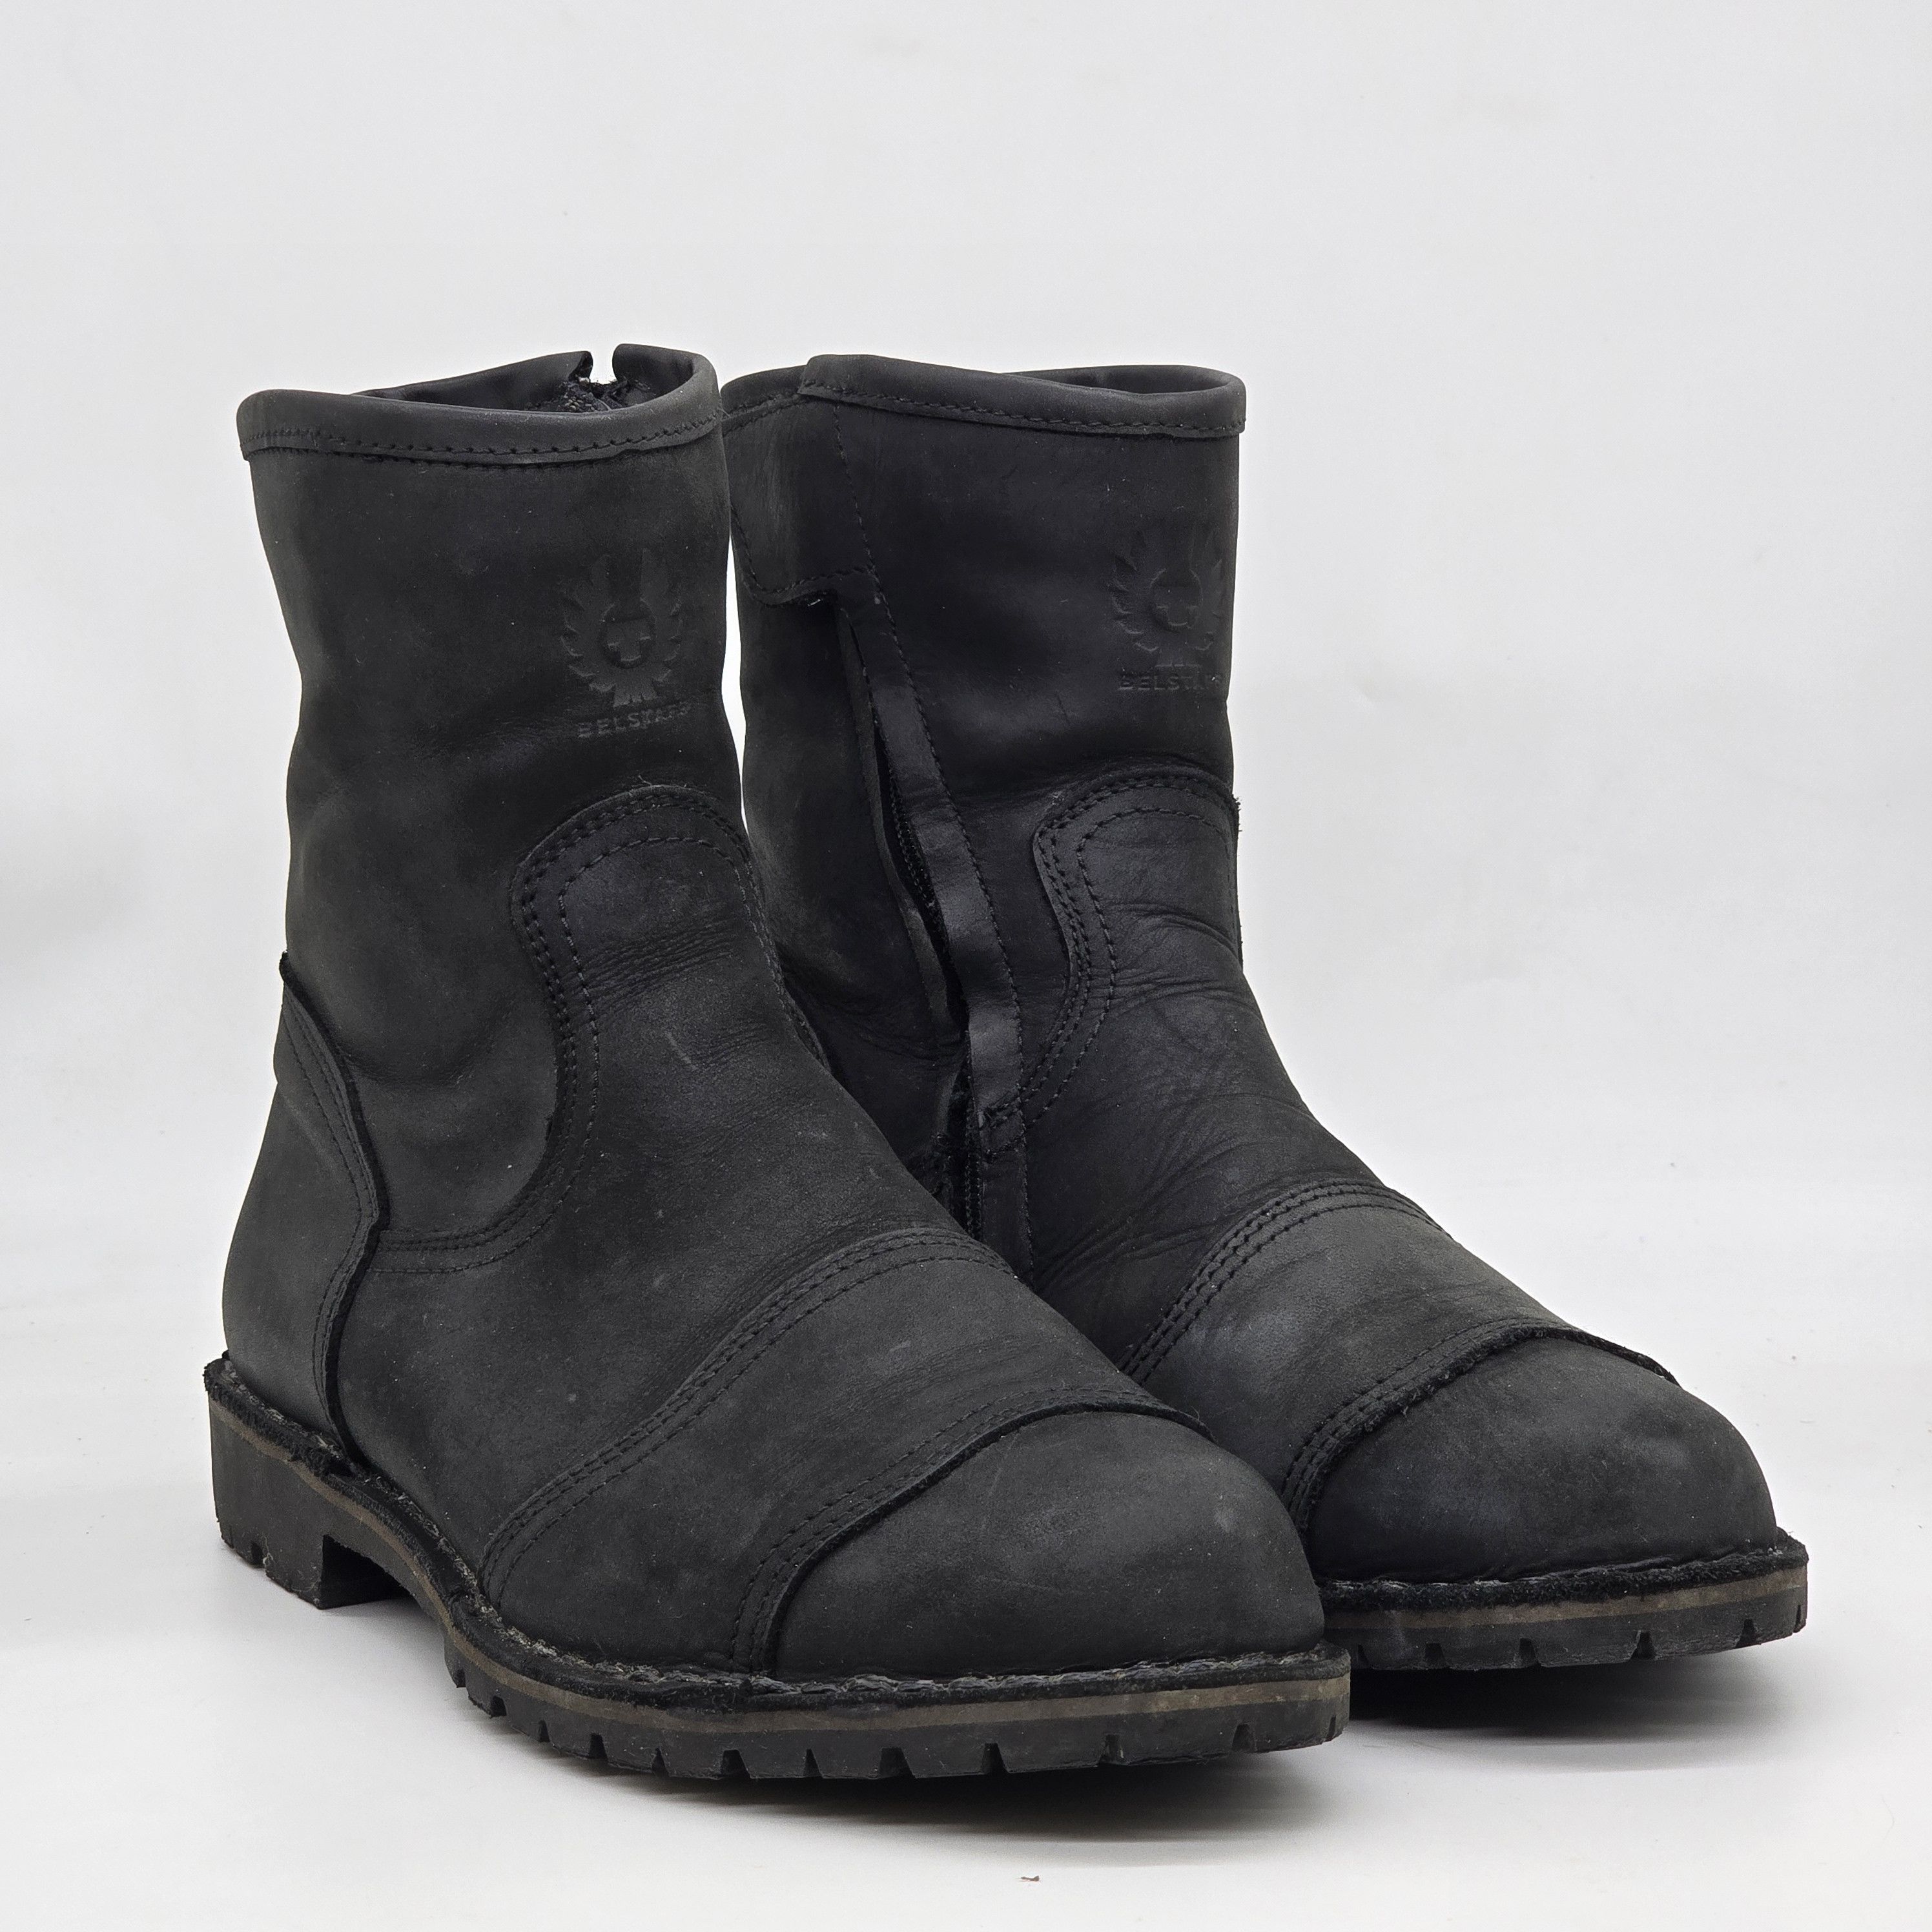 Belstaff - Duration Motorcycle Boots - 1